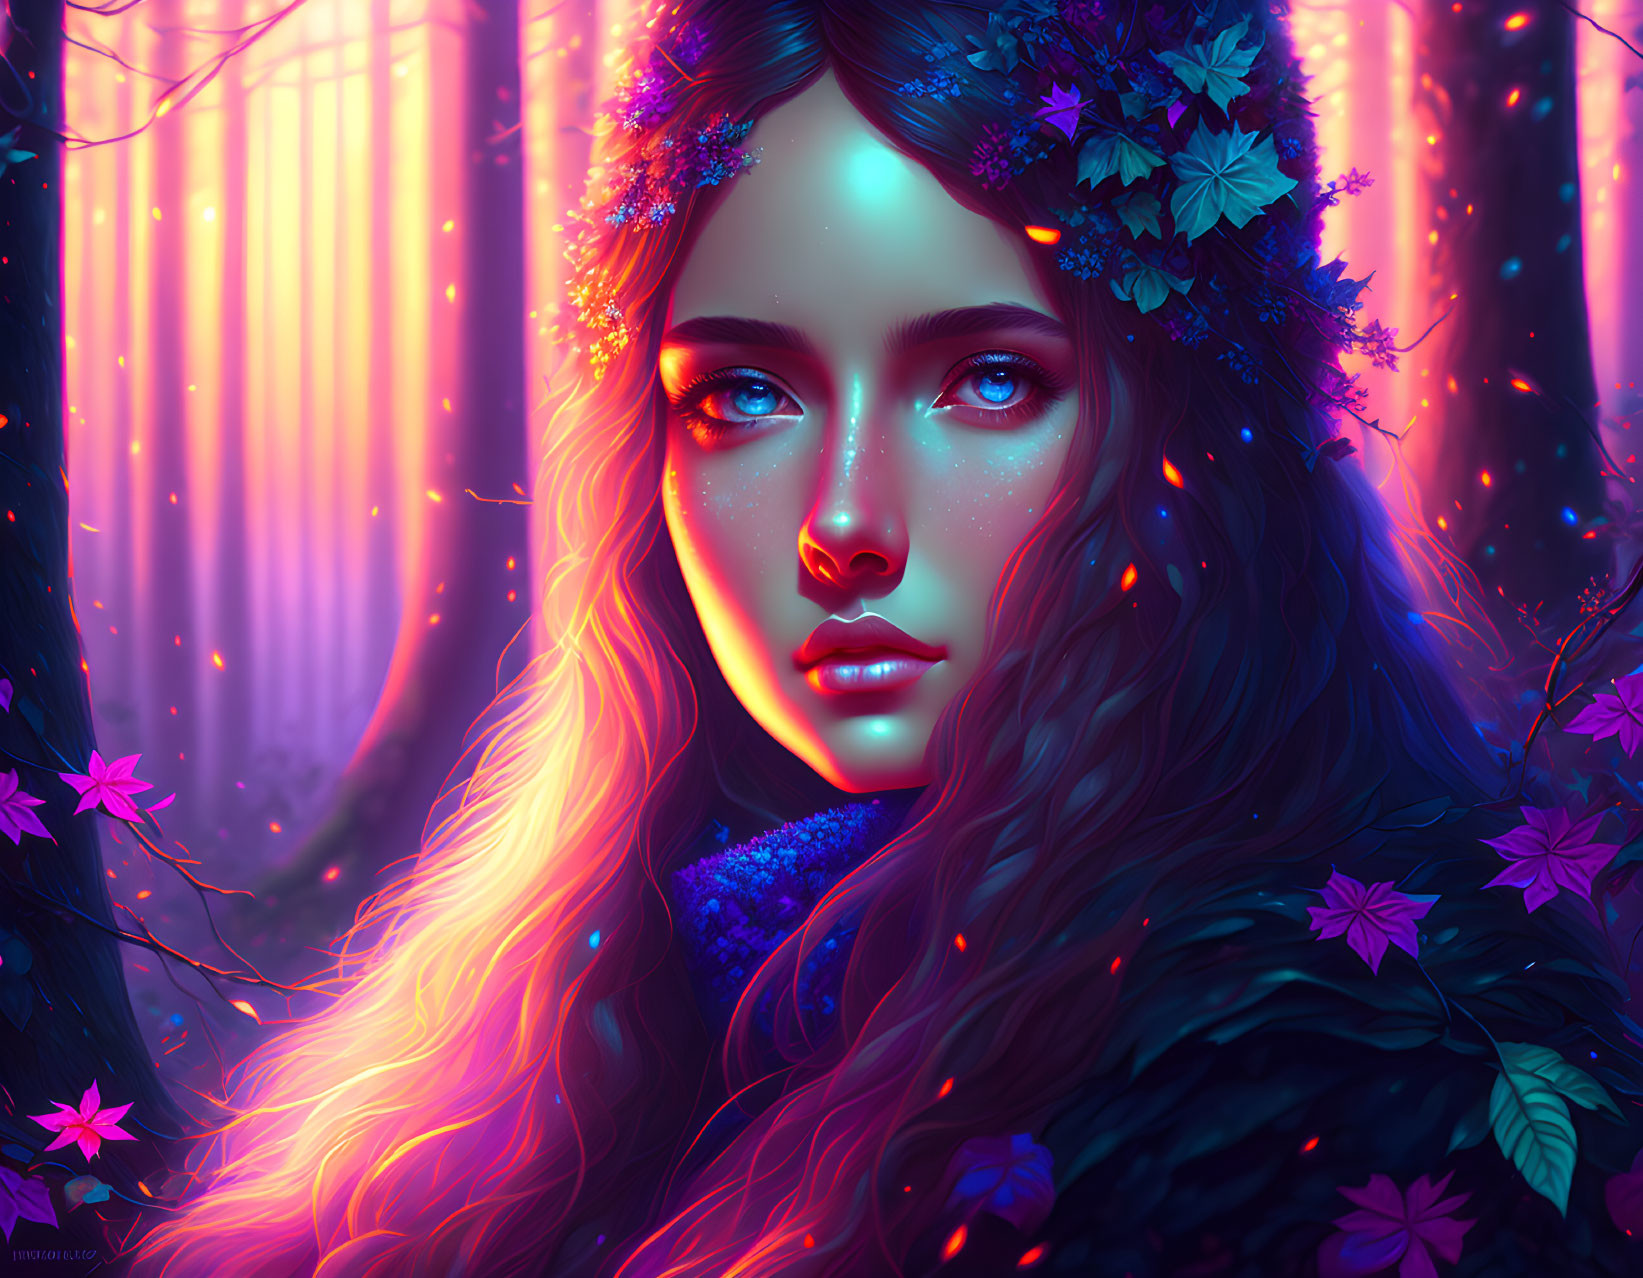 Digital portrait of woman with floral adornments in enchanted forest with blue eyes & purple-pink hues